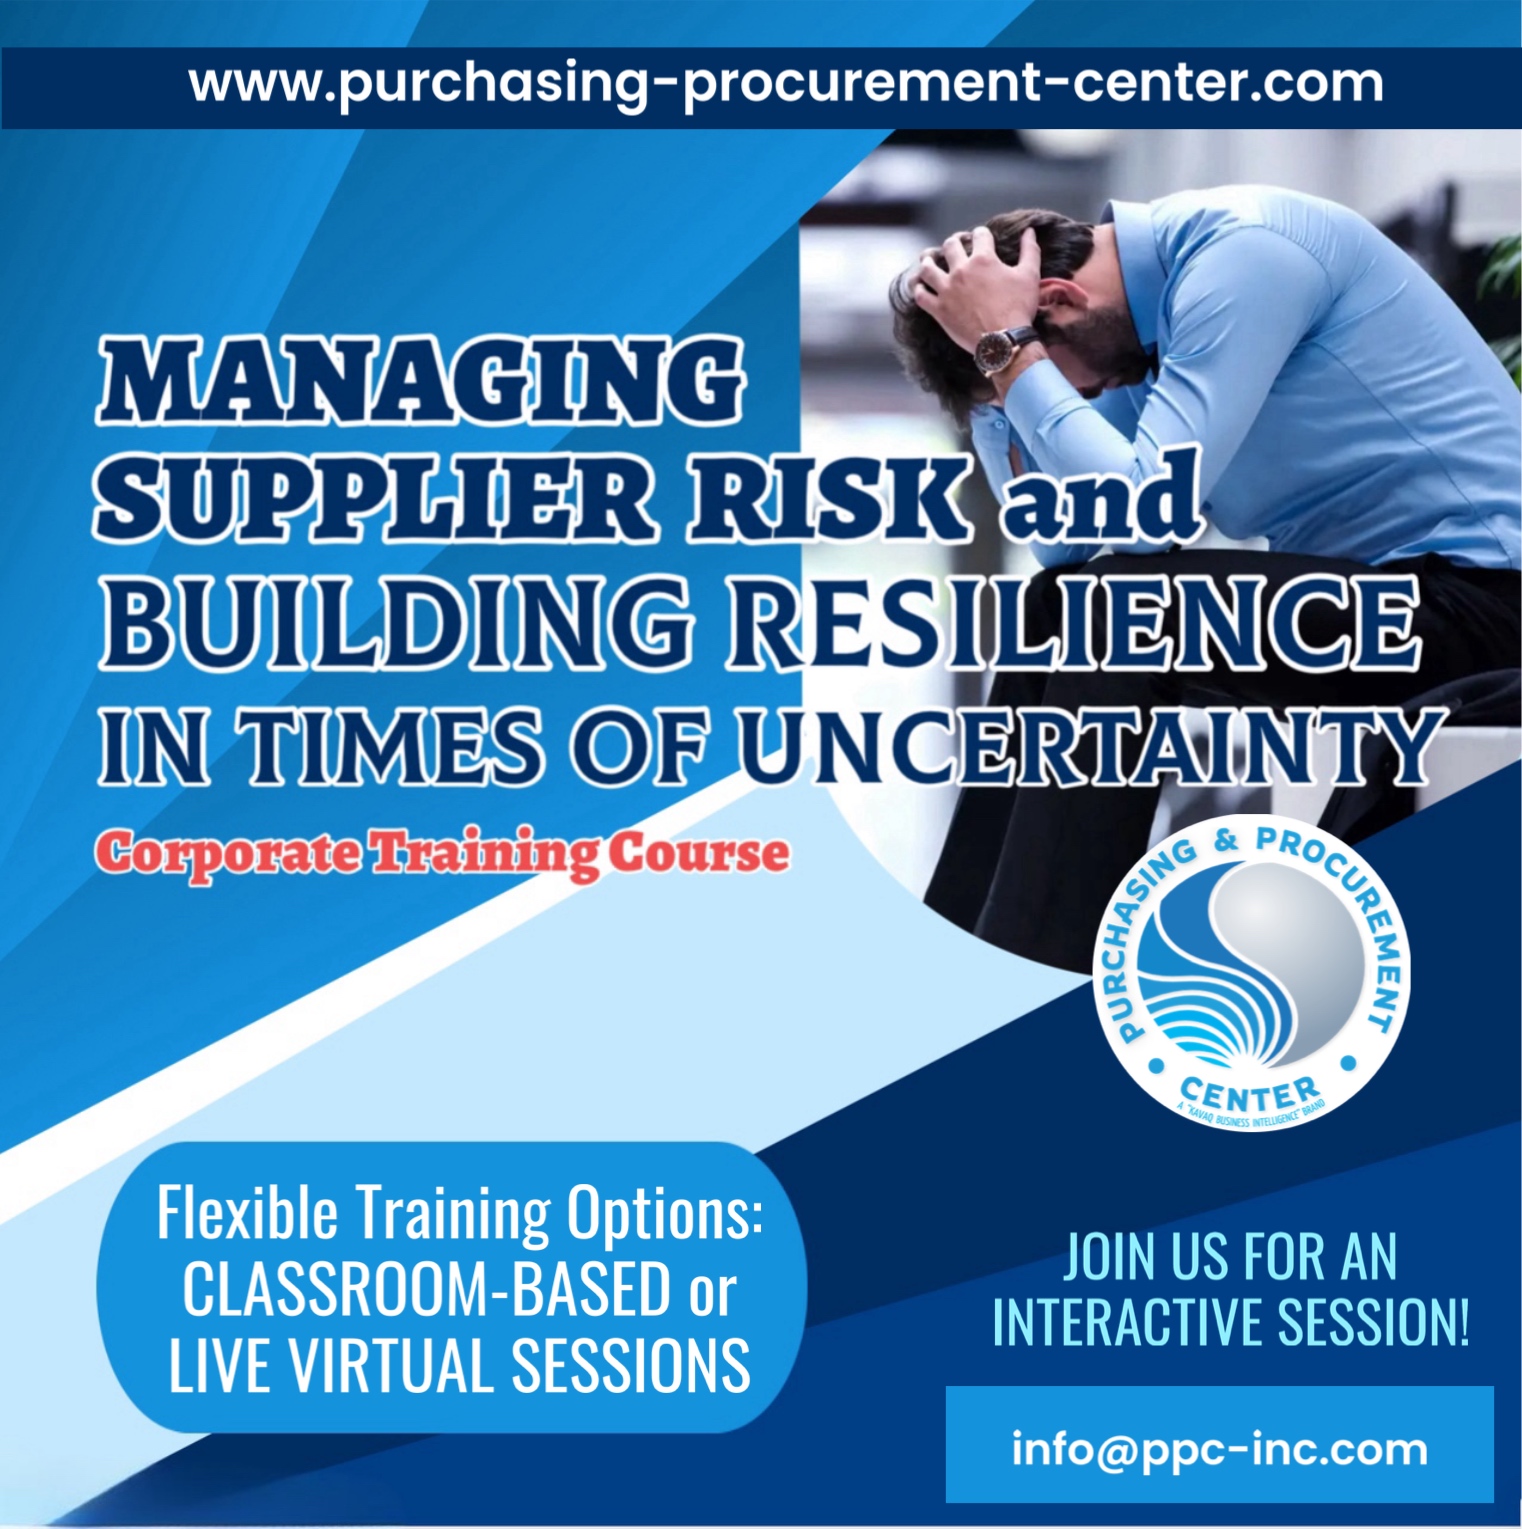 Supplier Risk Management Training Shows a Structured Approach to Manage Risks Throughout the Supply Chain! 